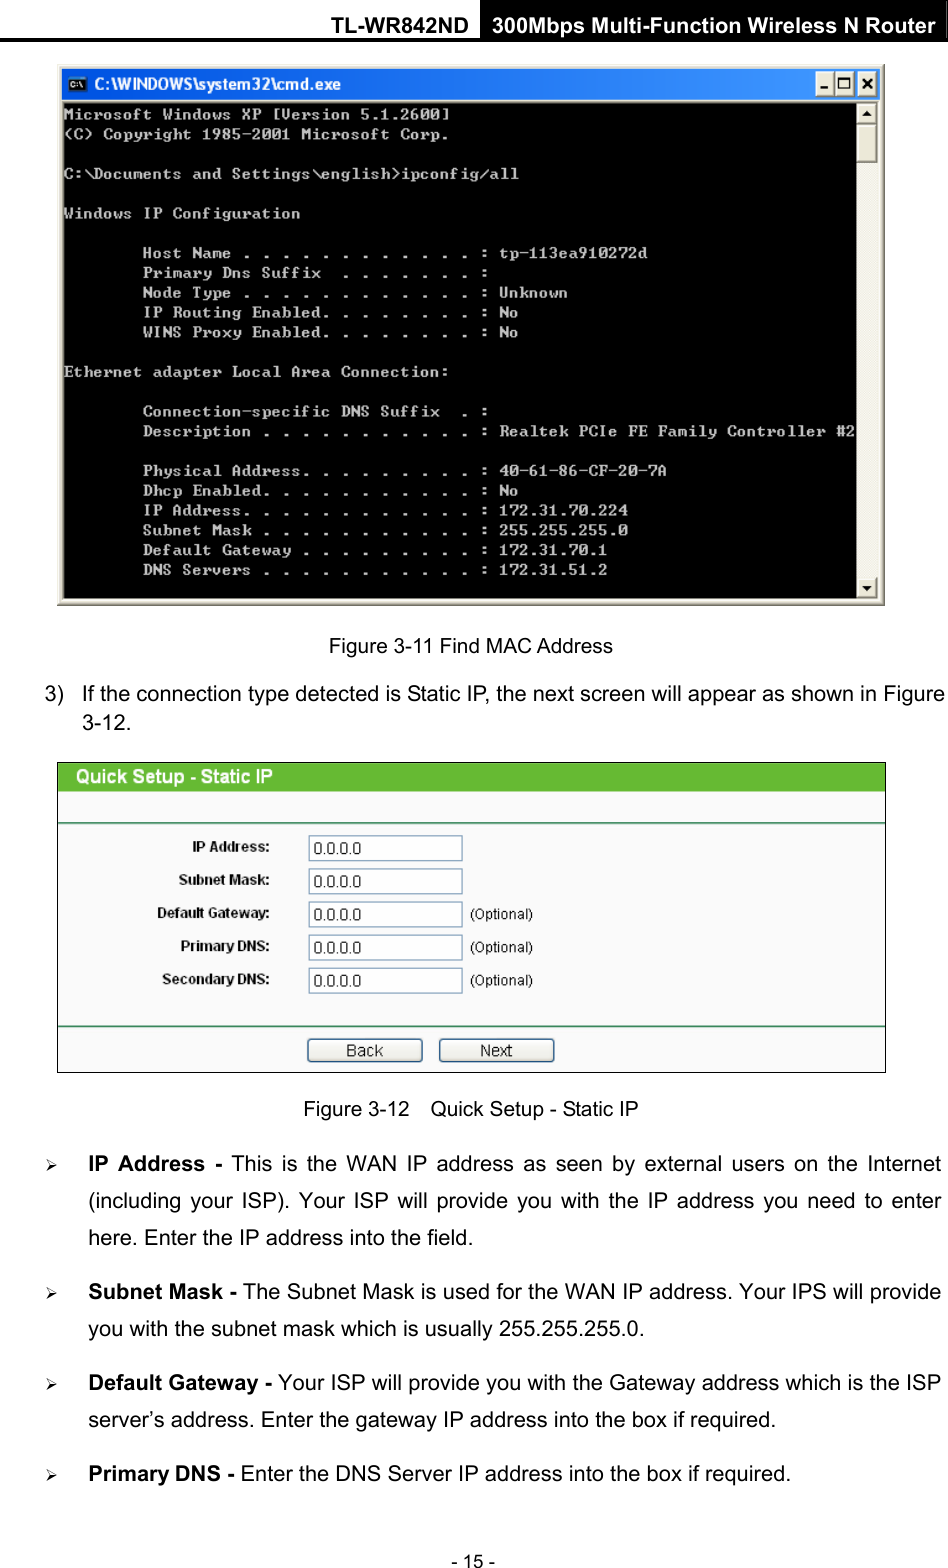 TL-WR842ND 300Mbps Multi-Function Wireless N Router - 15 -  Figure 3-11 Find MAC Address 3)  If the connection type detected is Static IP, the next screen will appear as shown in Figure 3-12.   Figure 3-12    Quick Setup - Static IP ¾ IP Address - This is the WAN IP address as seen by external users on the Internet (including your ISP). Your ISP will provide you with the IP address you need to enter here. Enter the IP address into the field. ¾ Subnet Mask - The Subnet Mask is used for the WAN IP address. Your IPS will provide you with the subnet mask which is usually 255.255.255.0. ¾ Default Gateway - Your ISP will provide you with the Gateway address which is the ISP server’s address. Enter the gateway IP address into the box if required. ¾ Primary DNS - Enter the DNS Server IP address into the box if required.   